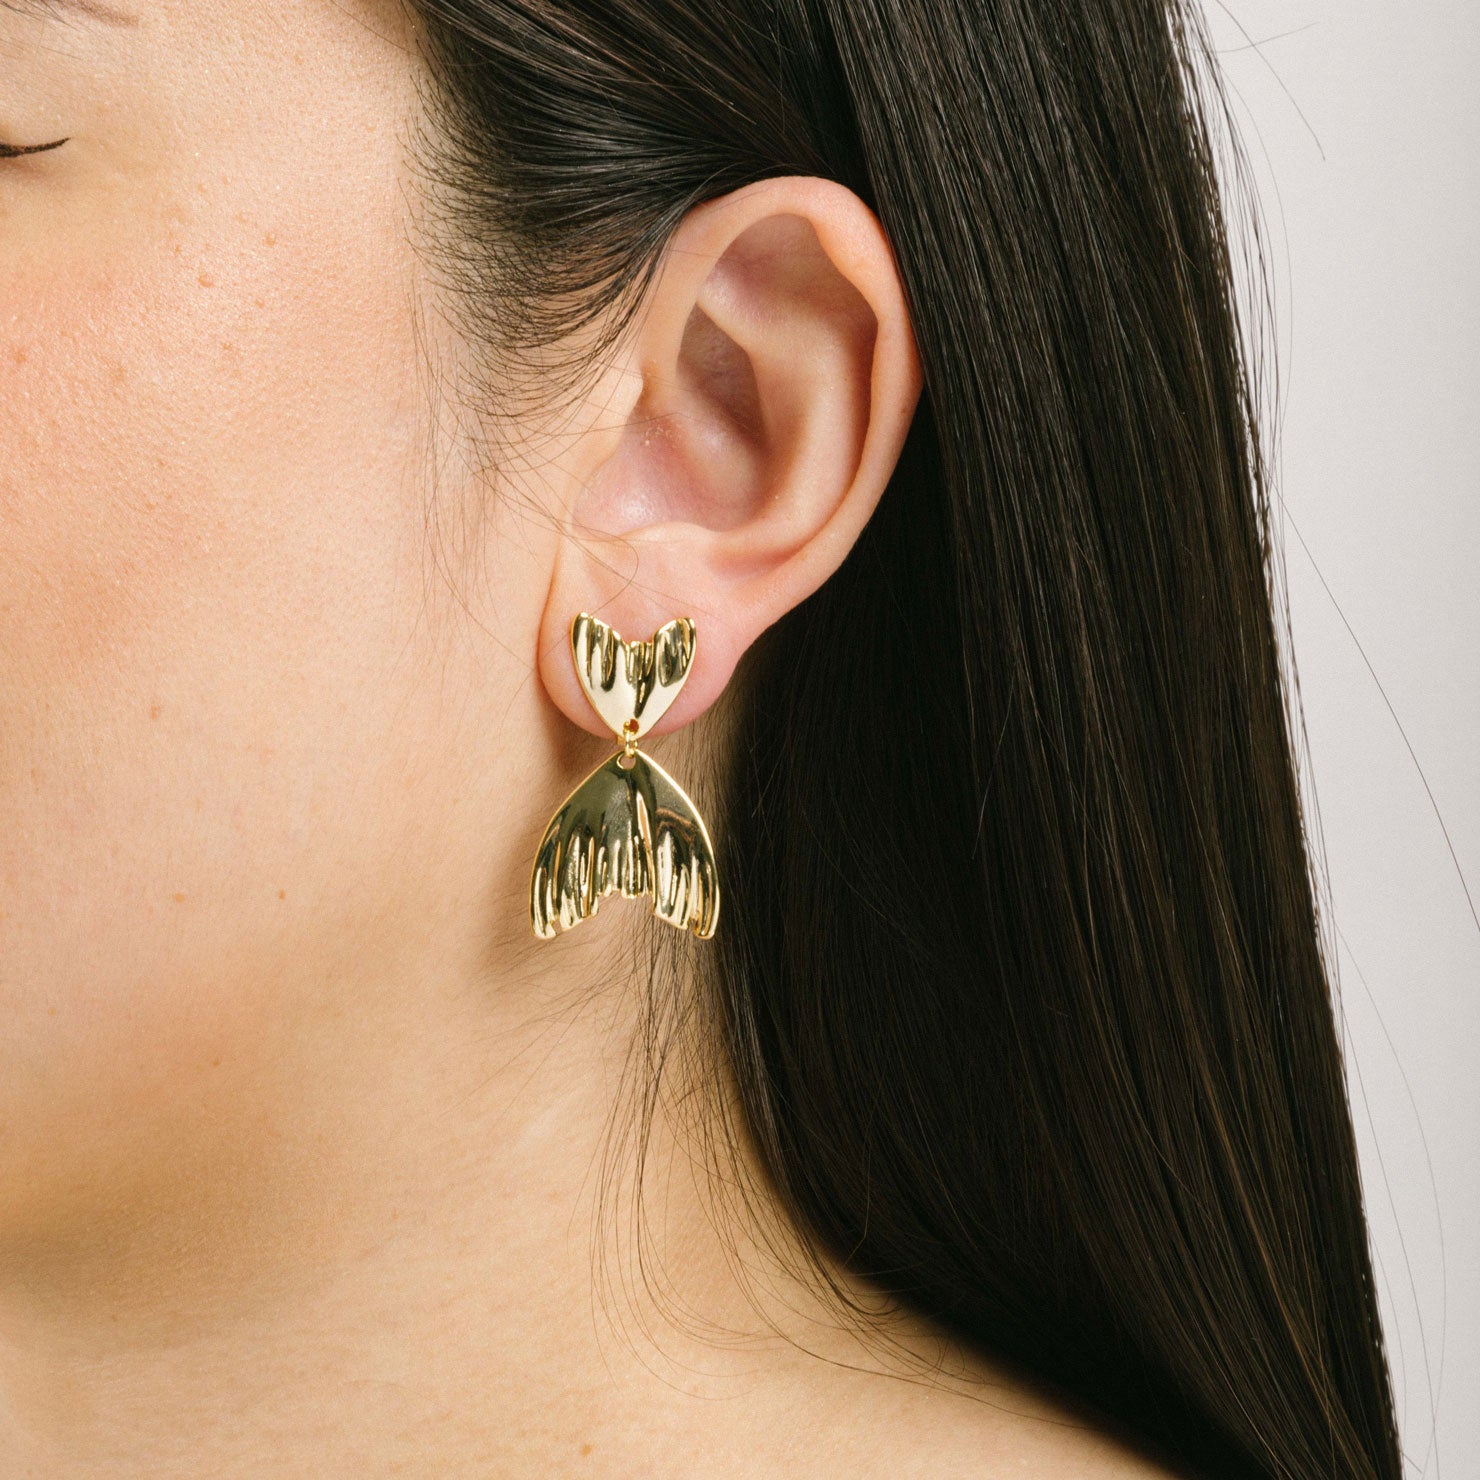 A model wearing the Mermaid Tail Clip On Earrings in Gold are perfect for all ear types including thick/large ears, sensitive ears, small/thin ears, and stretched/healing ears. With a zinc alloy body, these earrings offer a secure hold of up to 8-12 hours and come with removable rubber padding. Please note, item is only one pair.